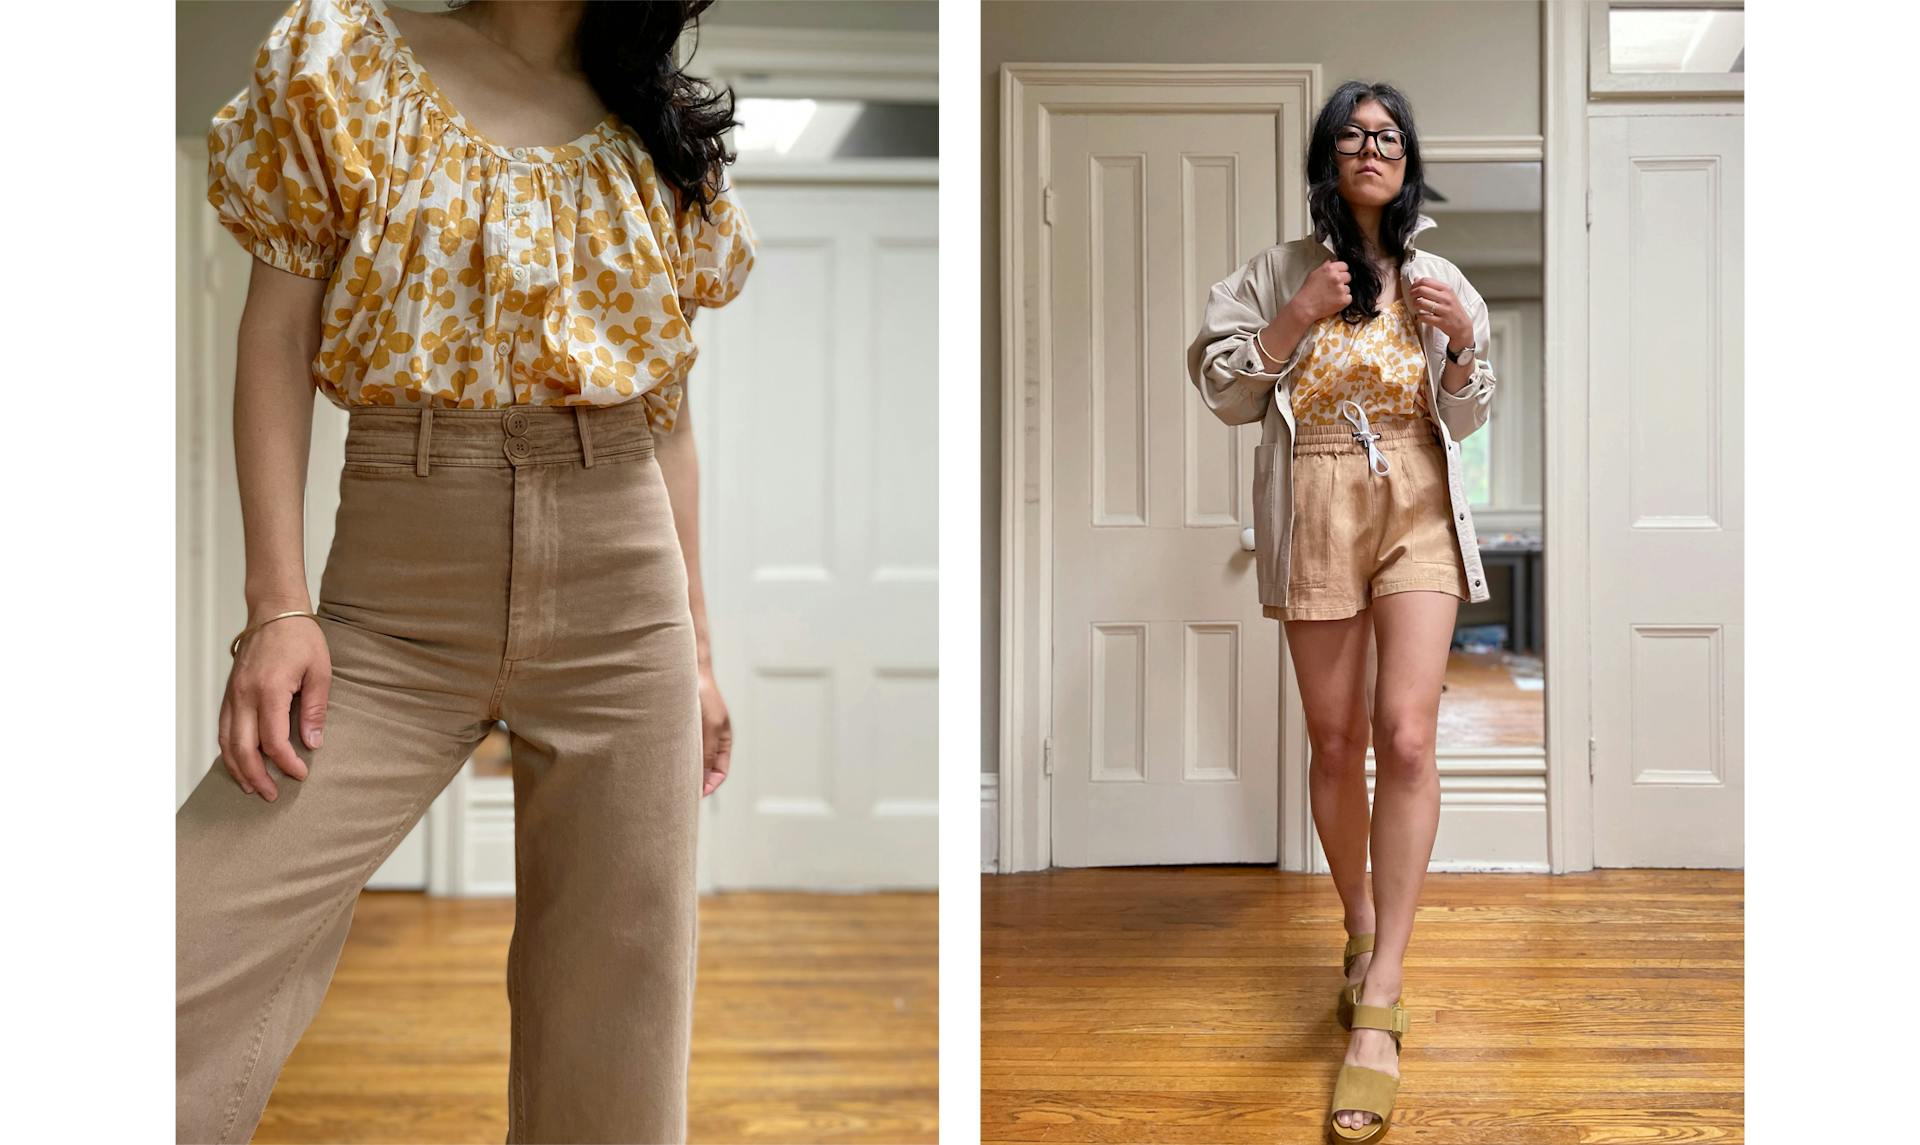 Two images. In the first, Erica Kim stands in a yellow top and brown pants. In the second, Erica Kim wears a pink outfit and faces the camera.